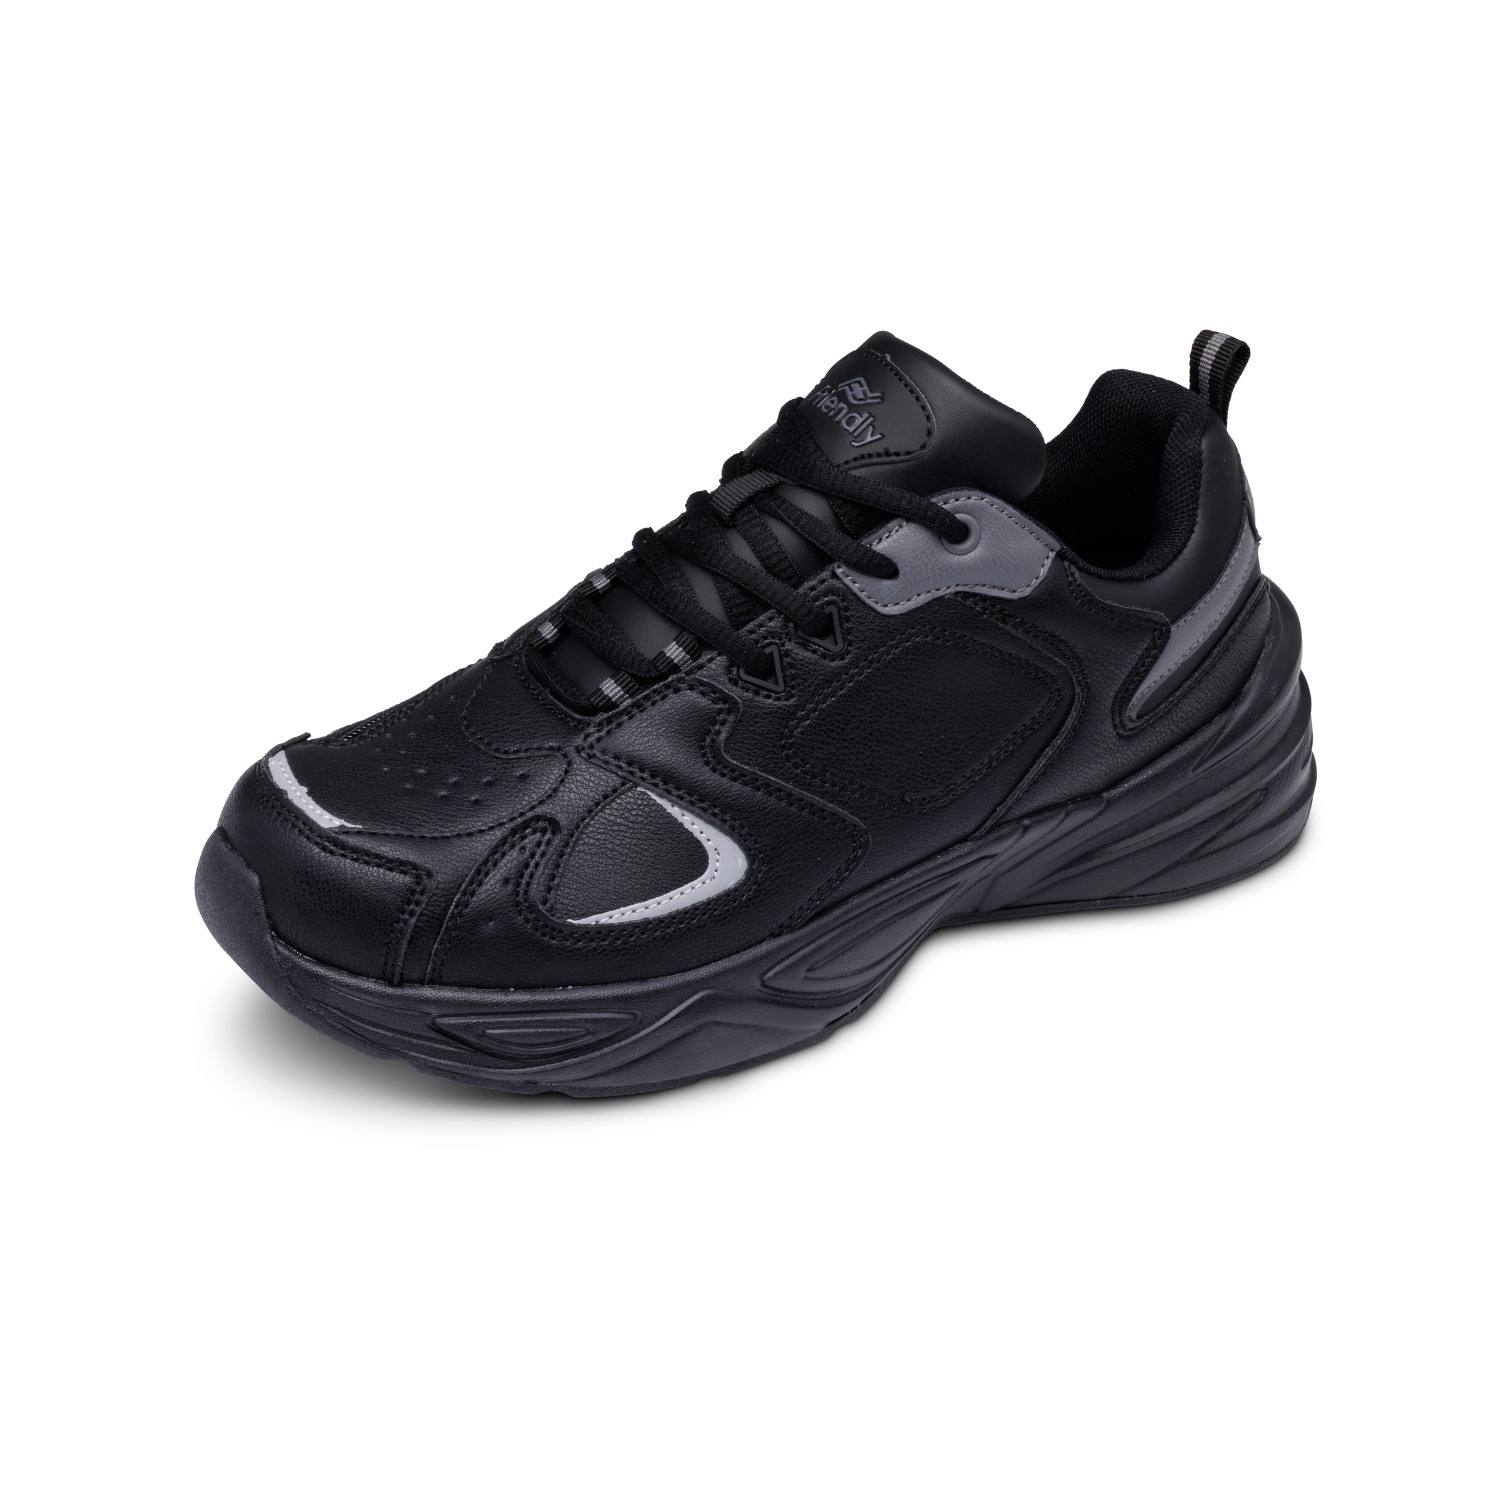 classic black sneakers with adaptive features